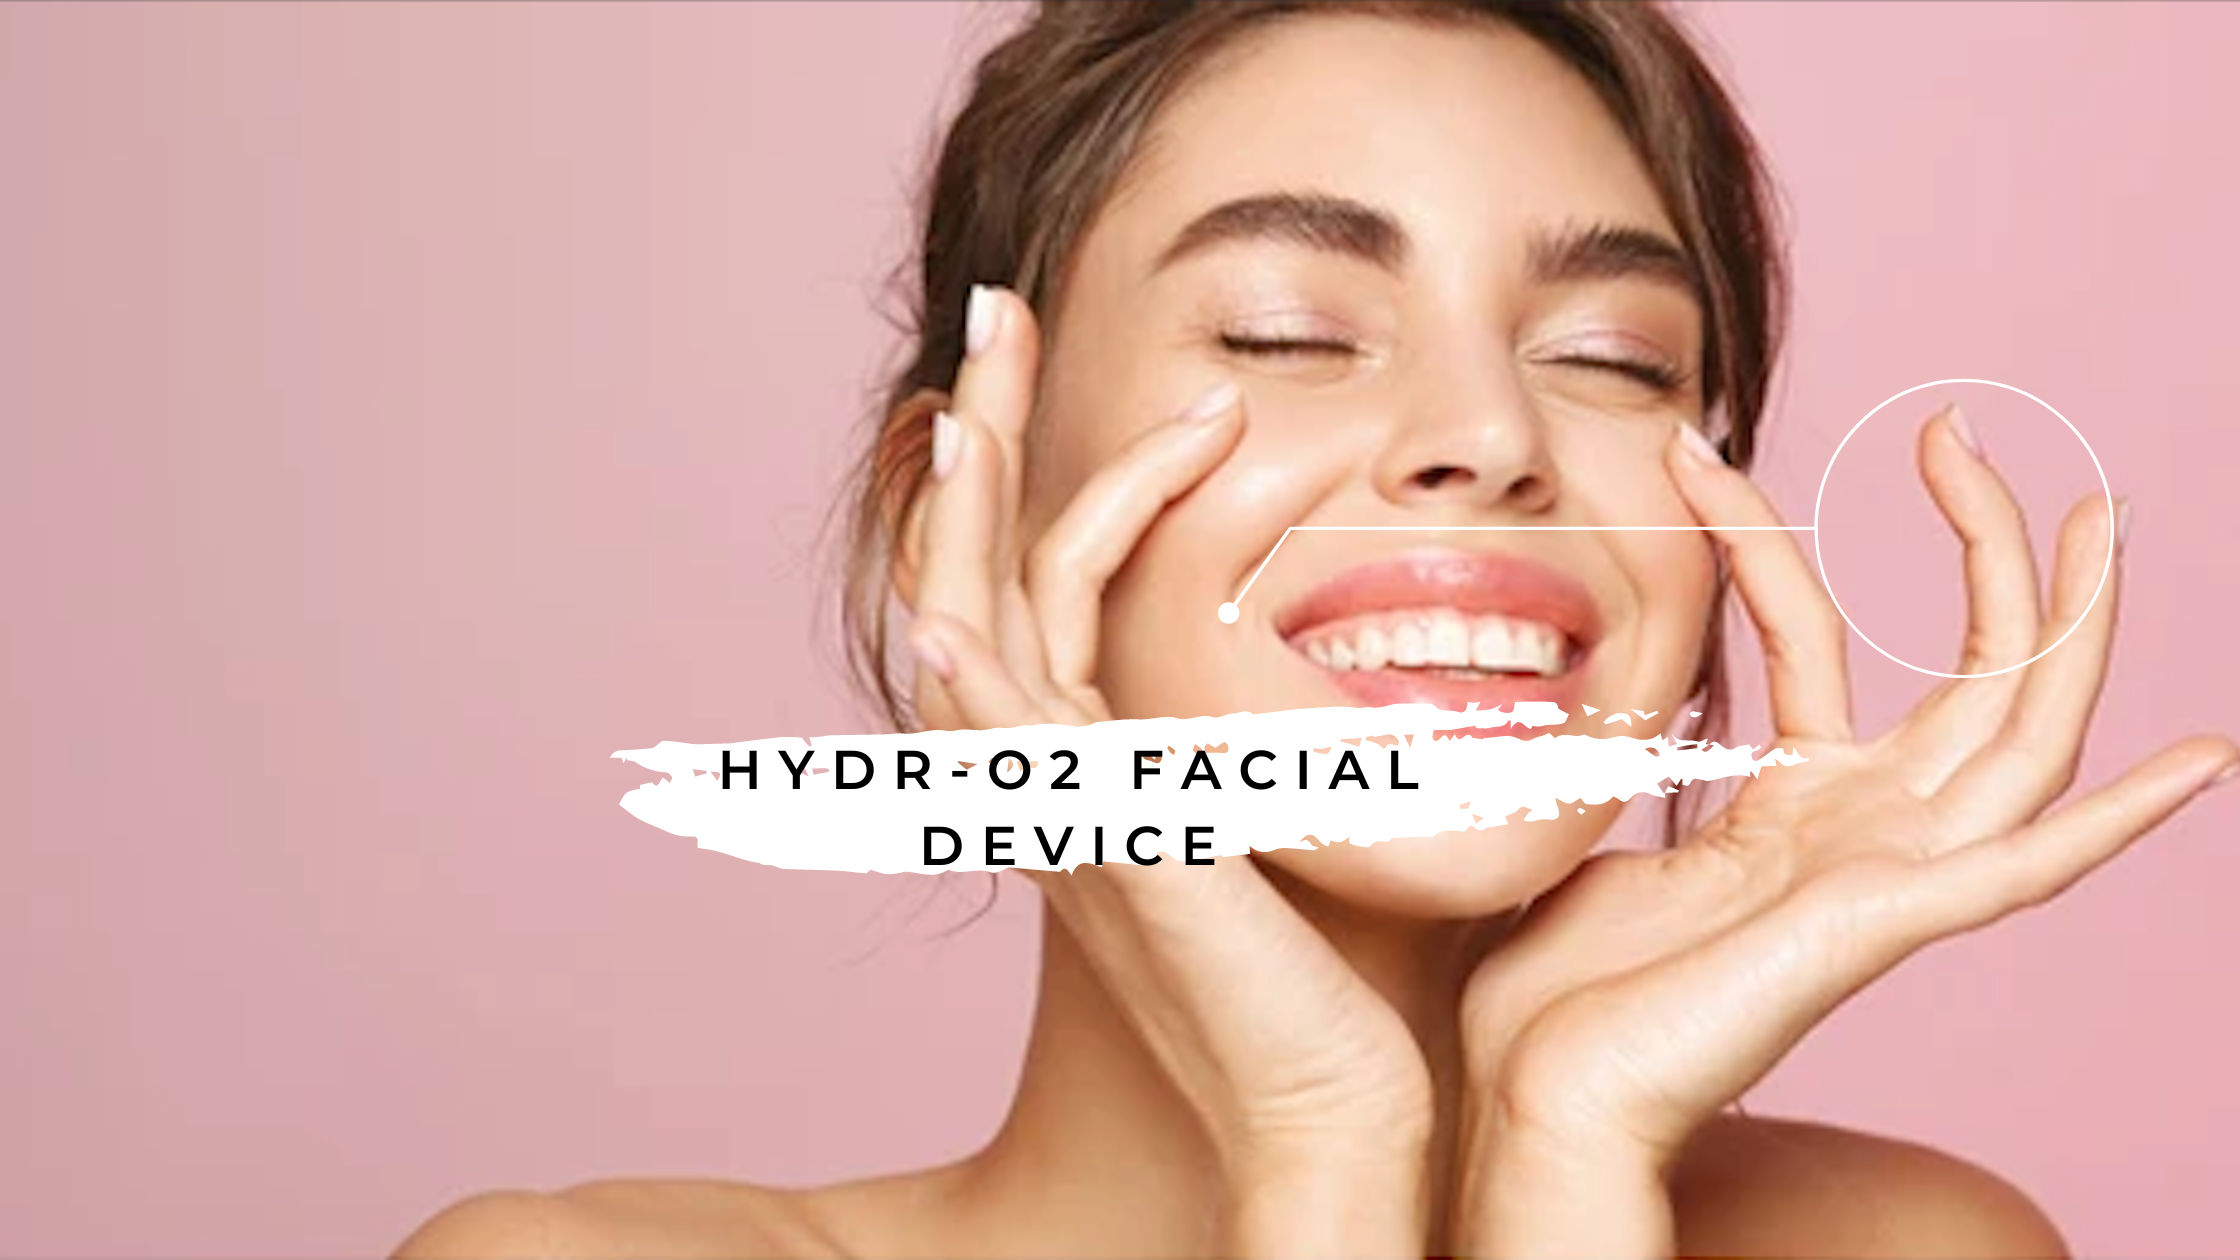 5 Reasons Why MultiPlatform Hydr-O2 Facial Device Boosts Salon Revenues